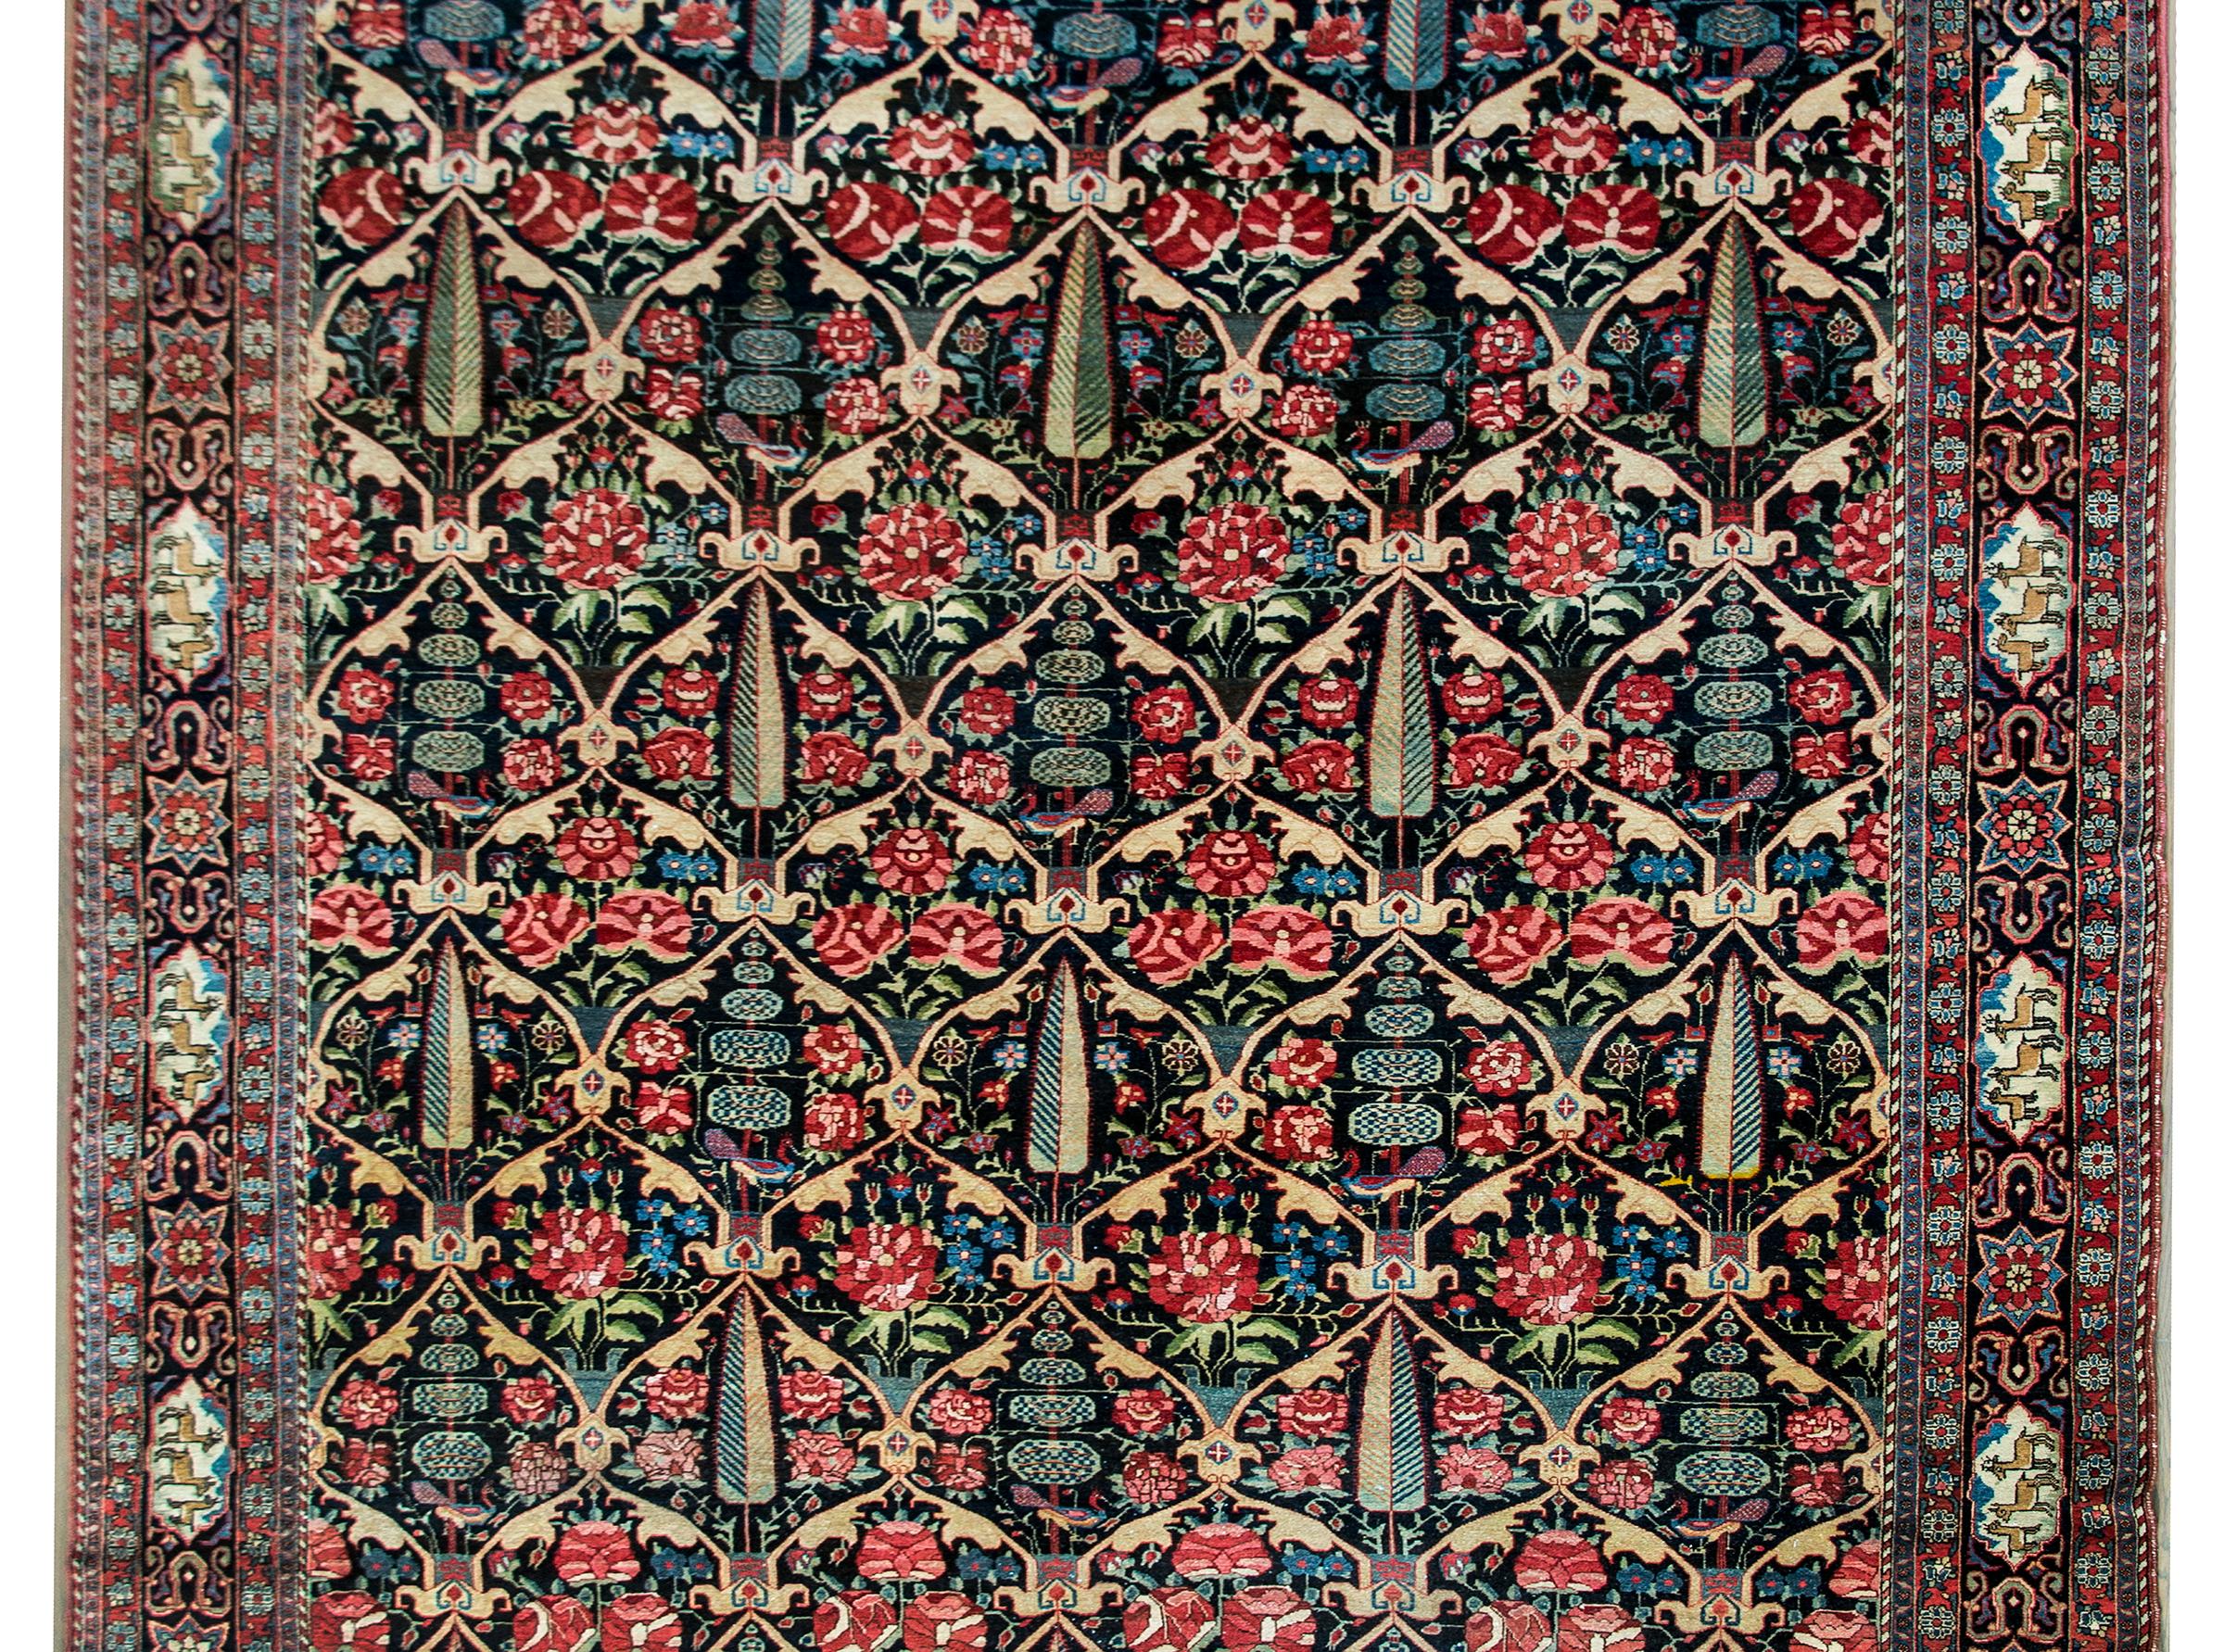 An absolutely stunning and chic early 20th century Persian Bakhtiari rug with an all-over William Morris-esque trellis pattern with cypress trees, topiaries, and large roses, and surrounded by a wide border with deer medallions living amidst more